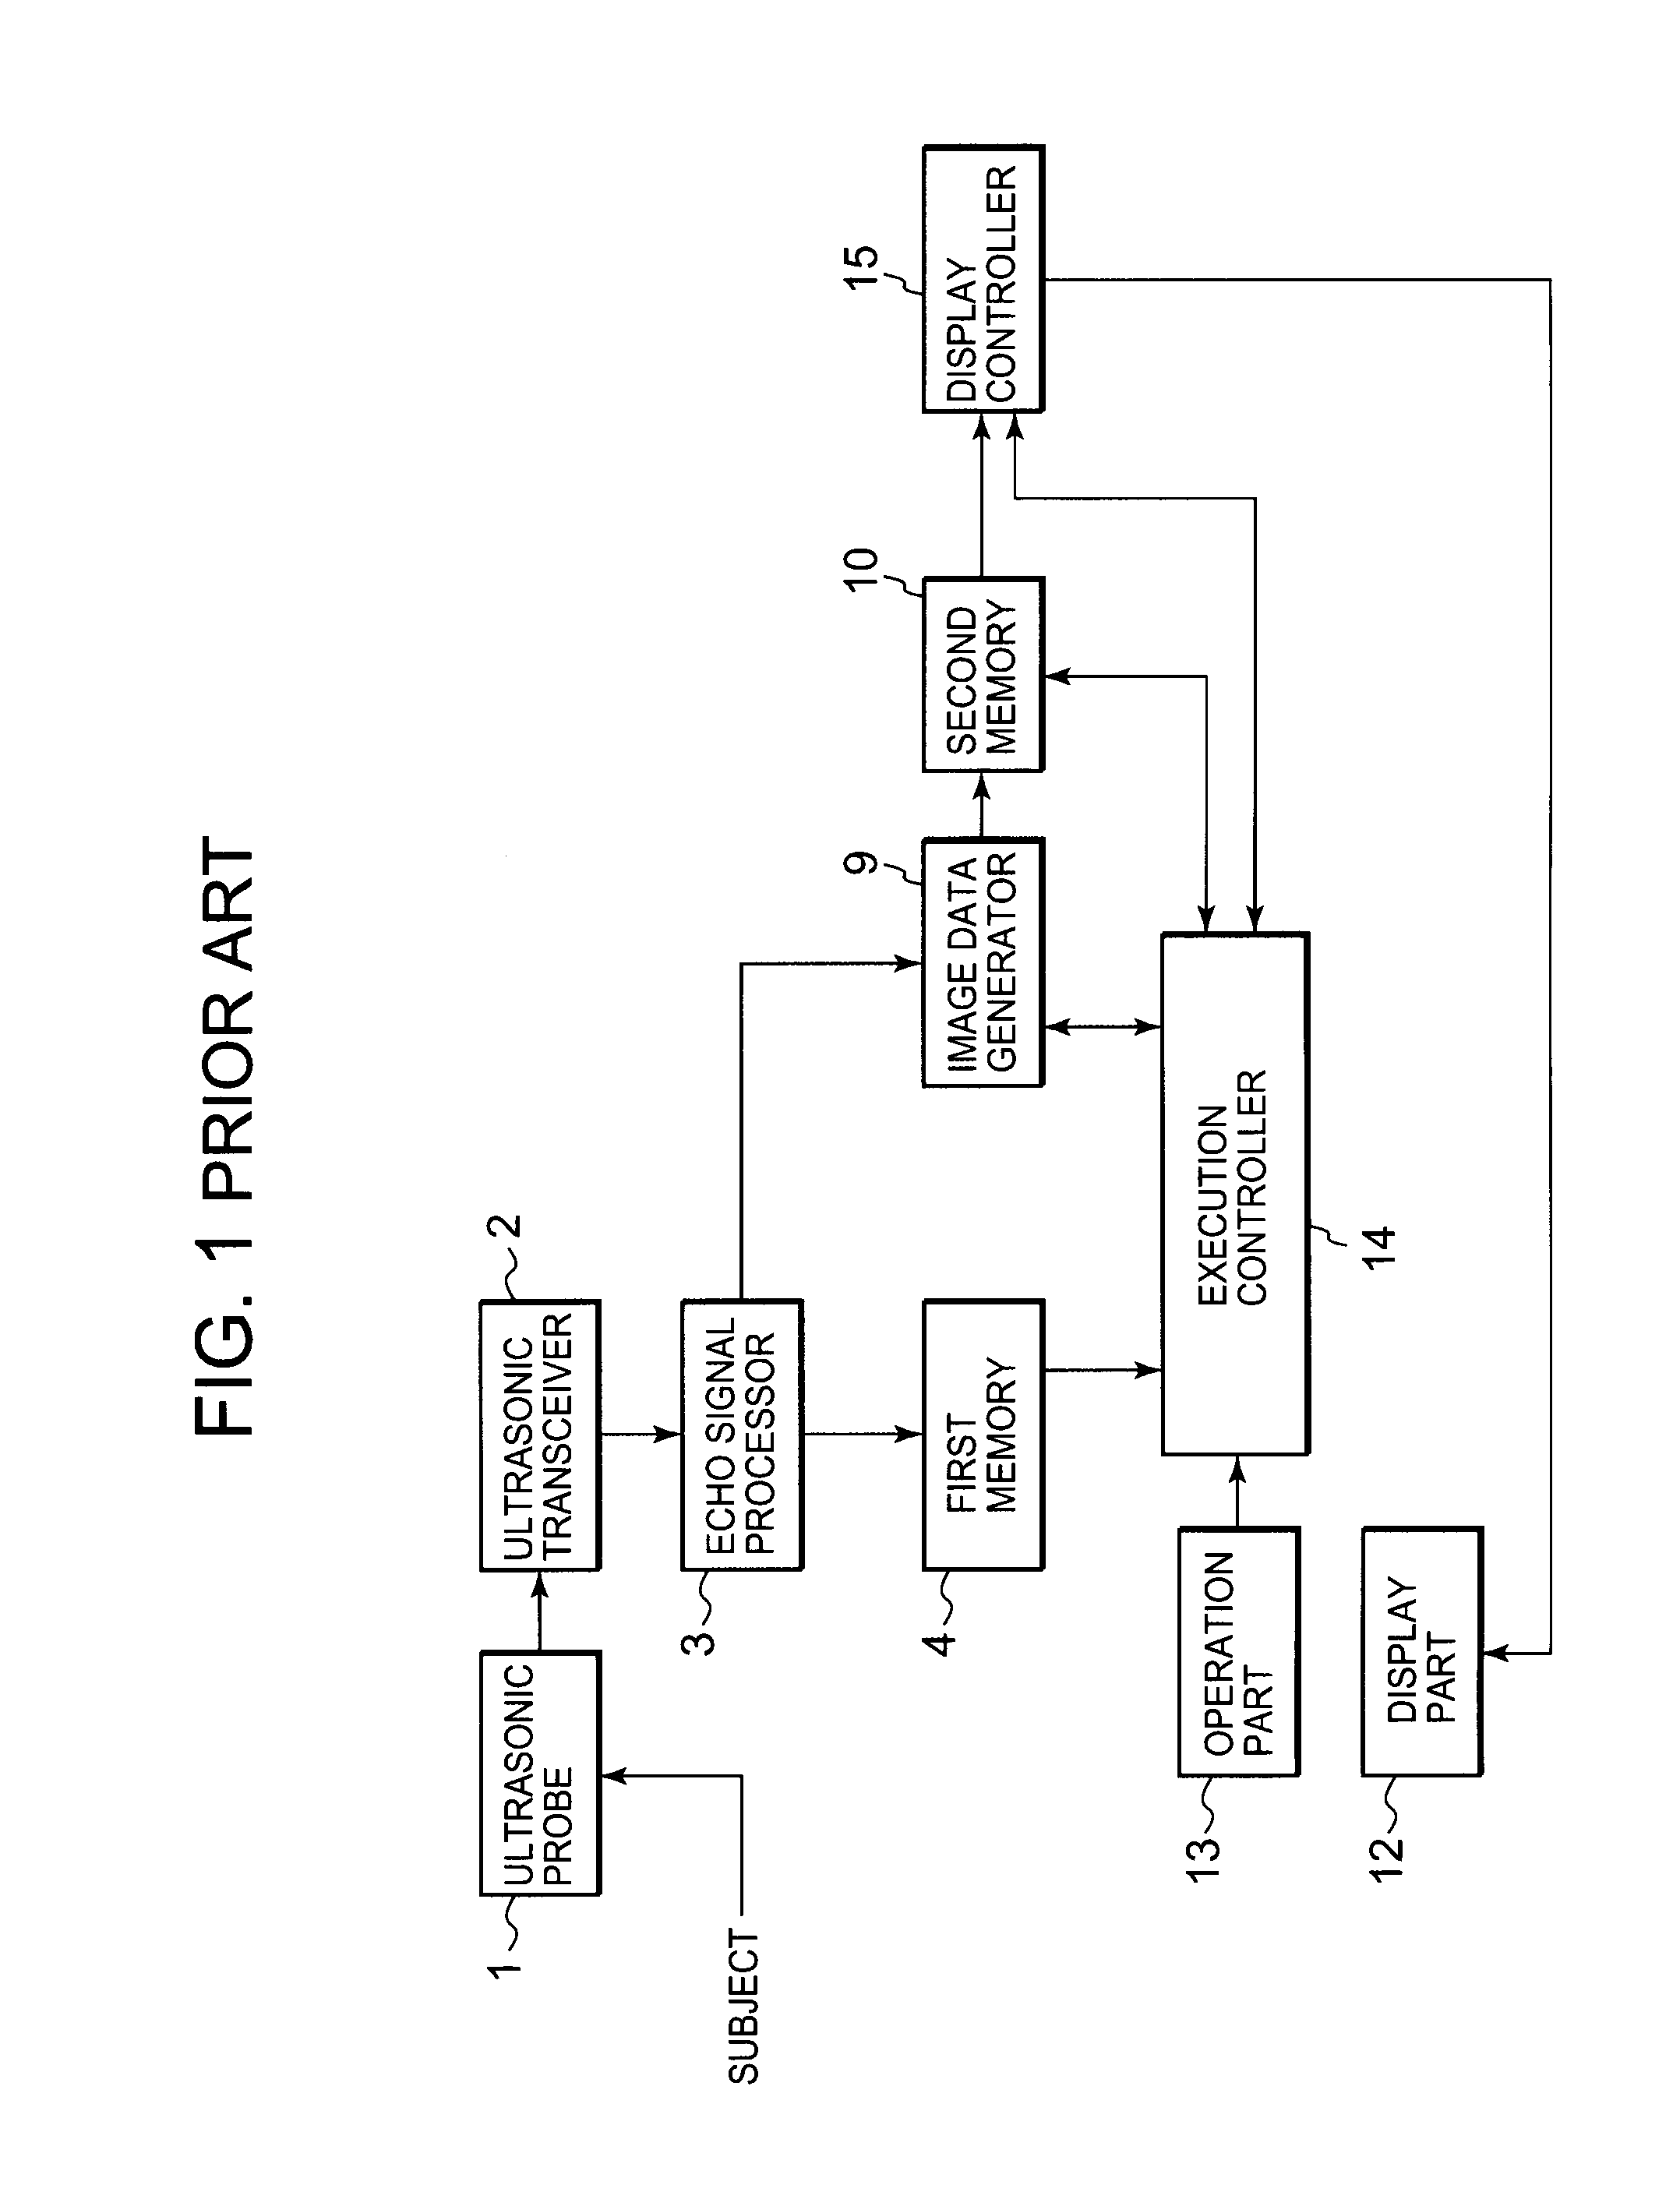 Ultrasonic imaging apparatus, a method for displaying a diagnostic image, and a medical apparatus